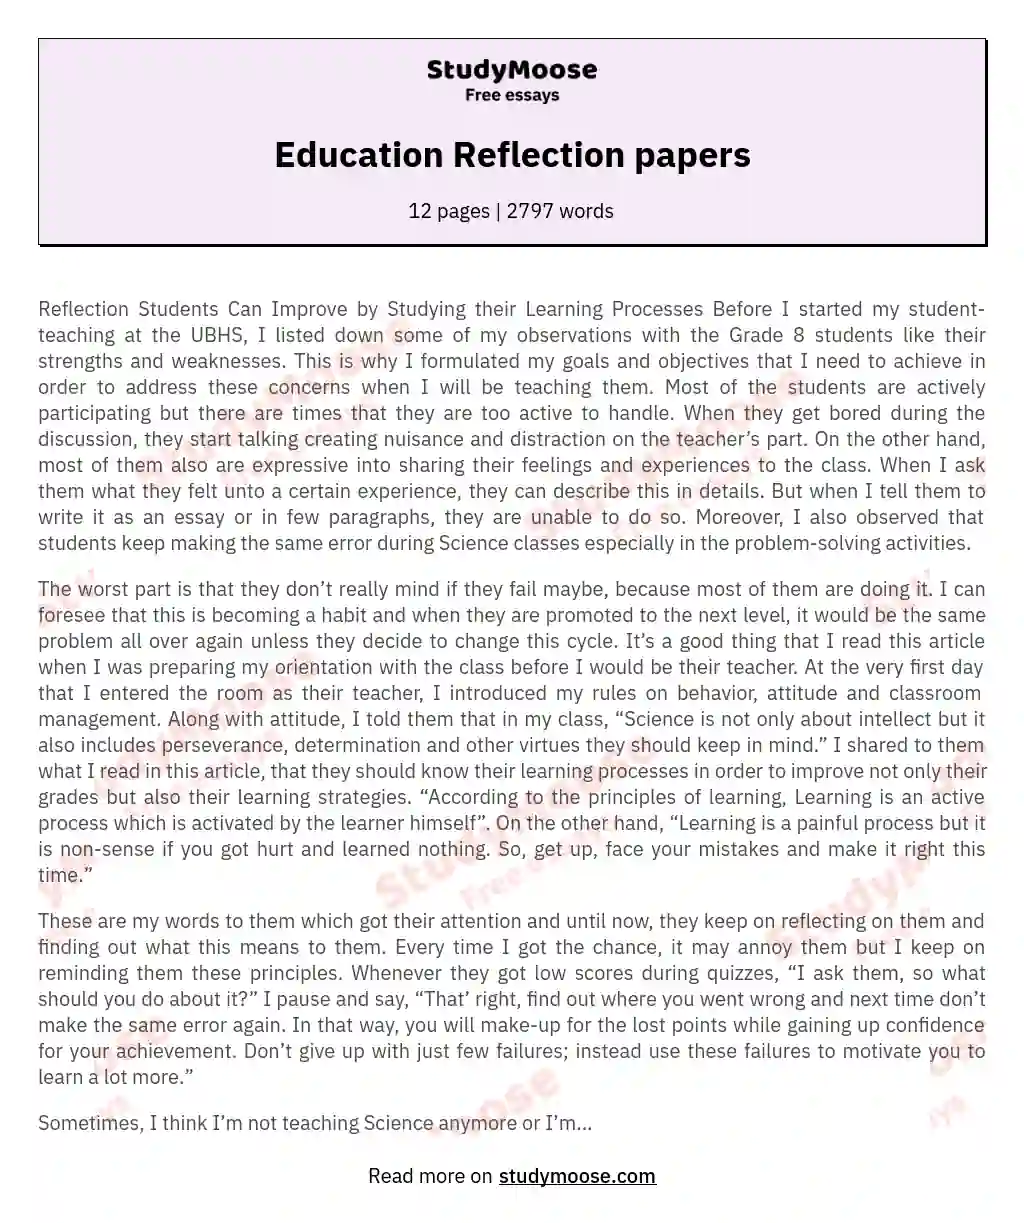 Education Reflection papers essay